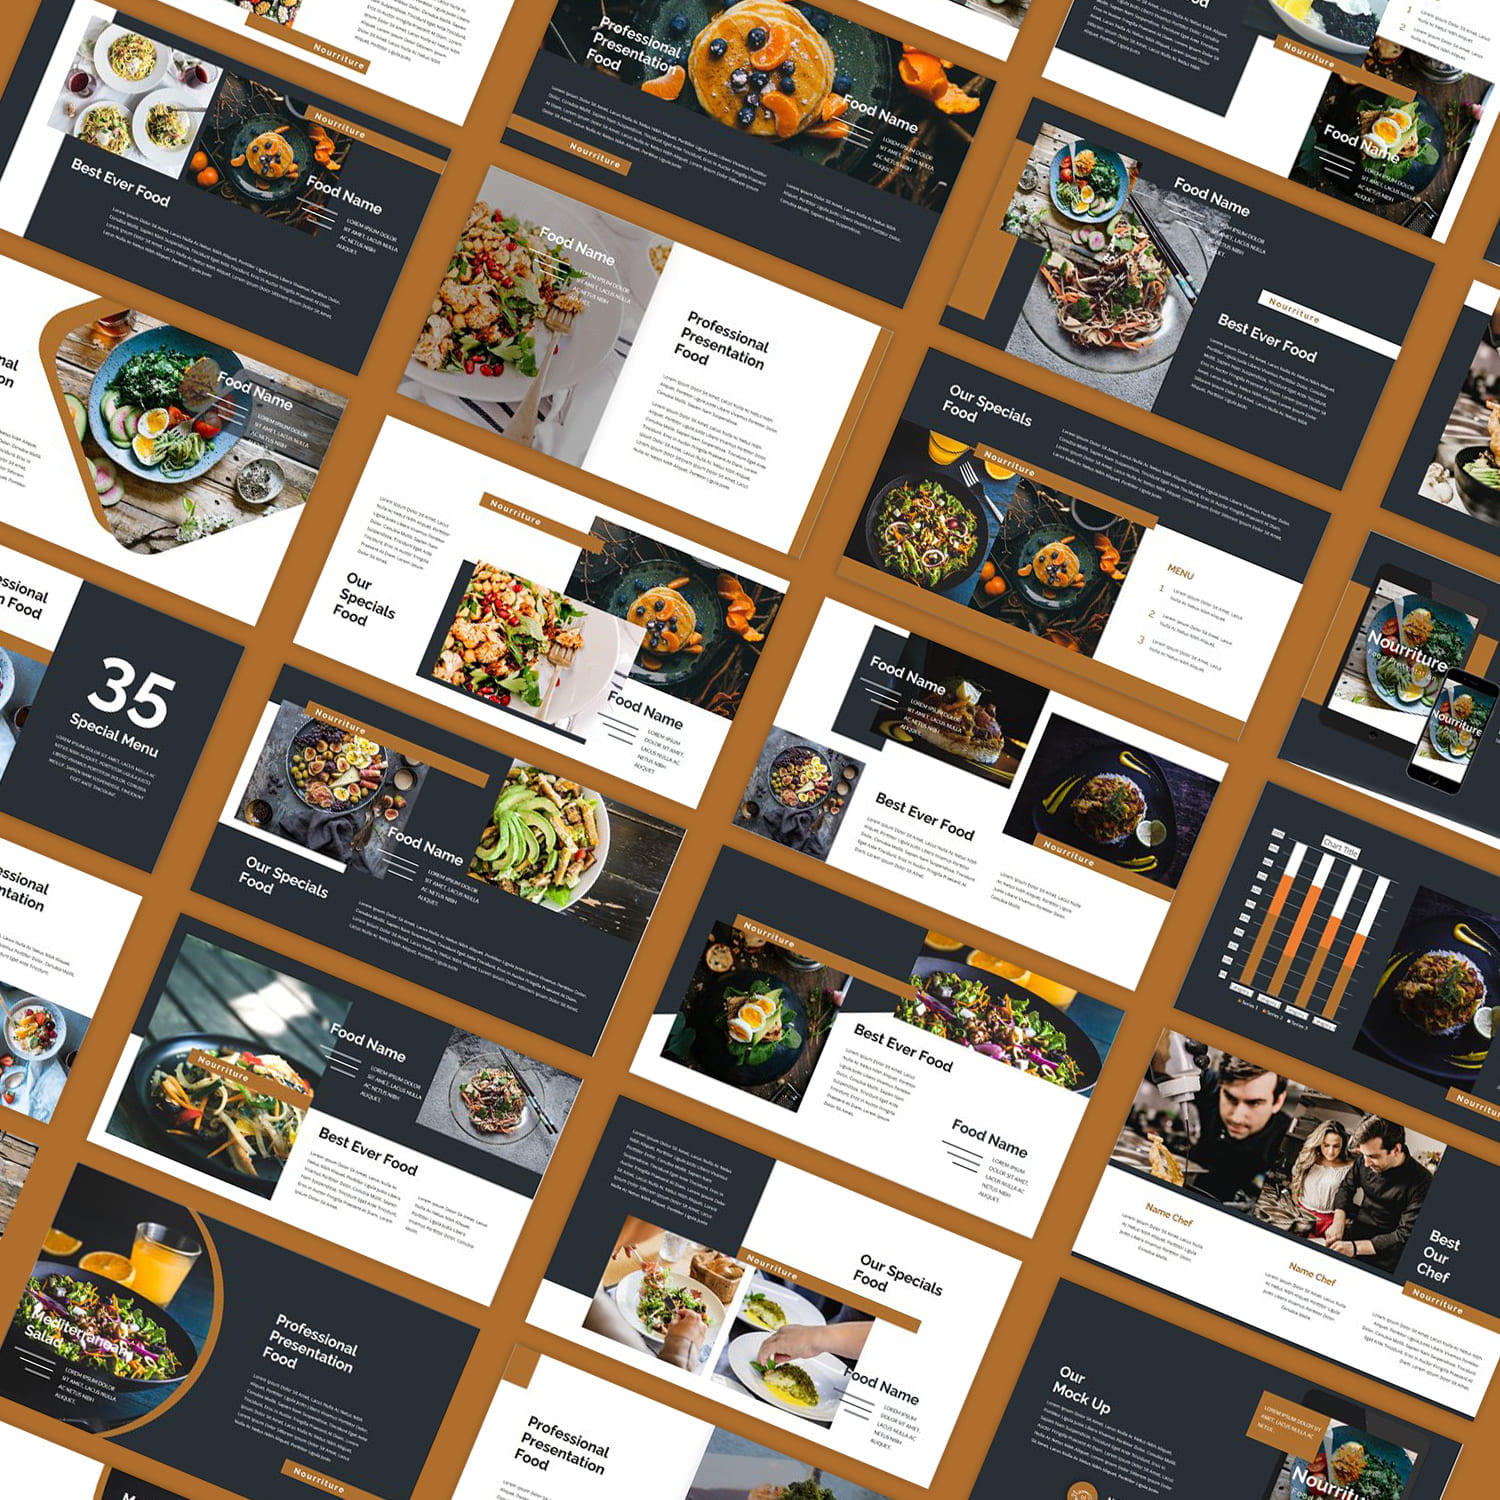 This template is suitable for food lovers, restaurant, cafe, cooking, recipes.